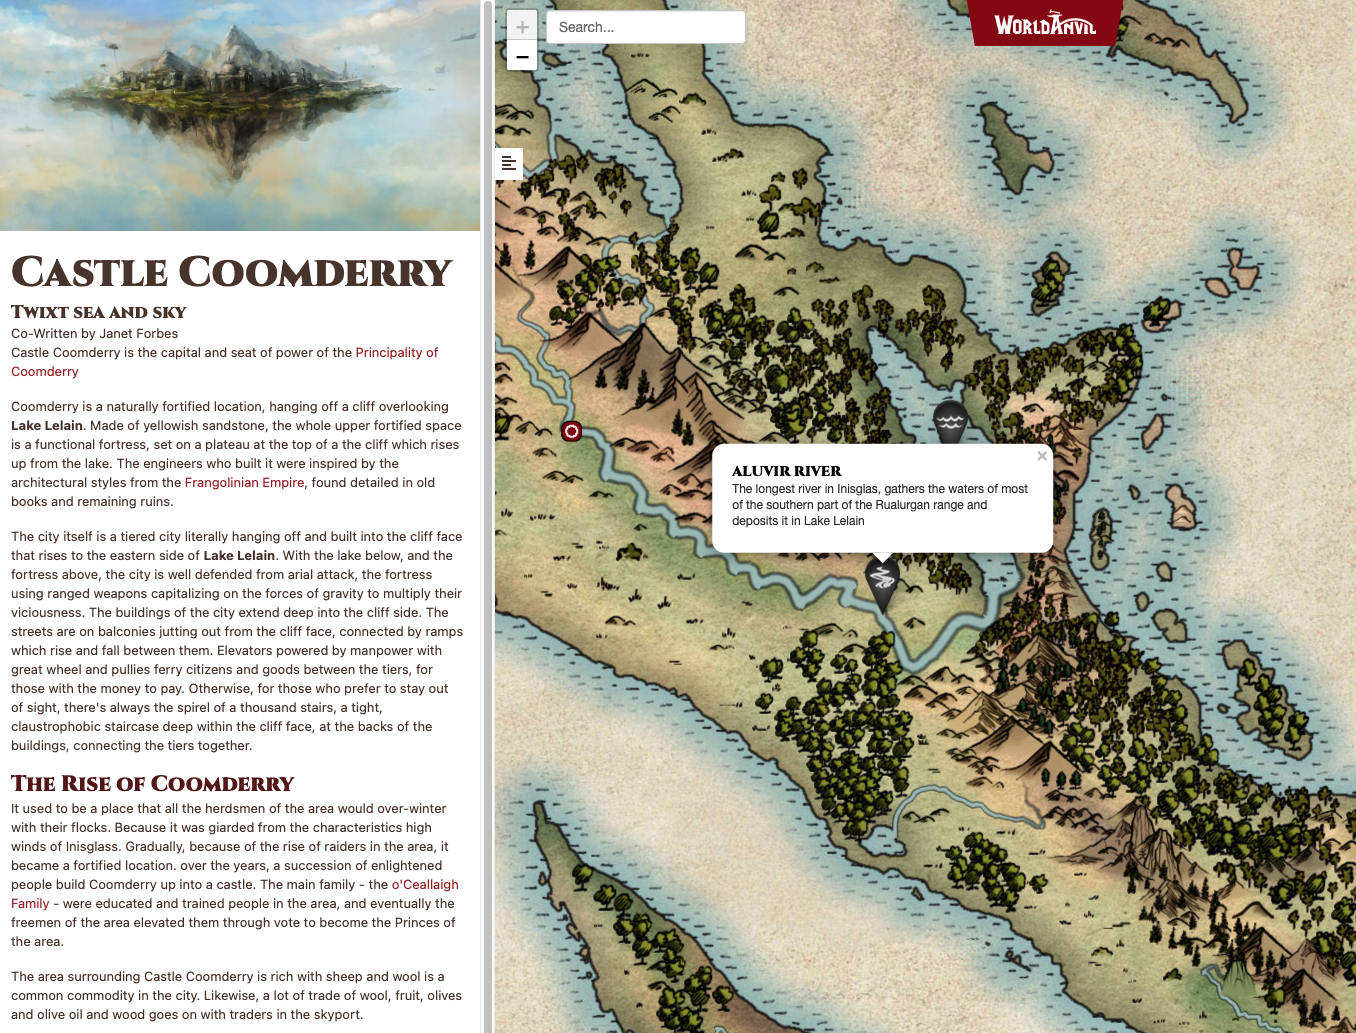 An example of World Anvil’s secure worldbuilding notebook with advanced privacy settings, as shown on an interactive fantasy map.